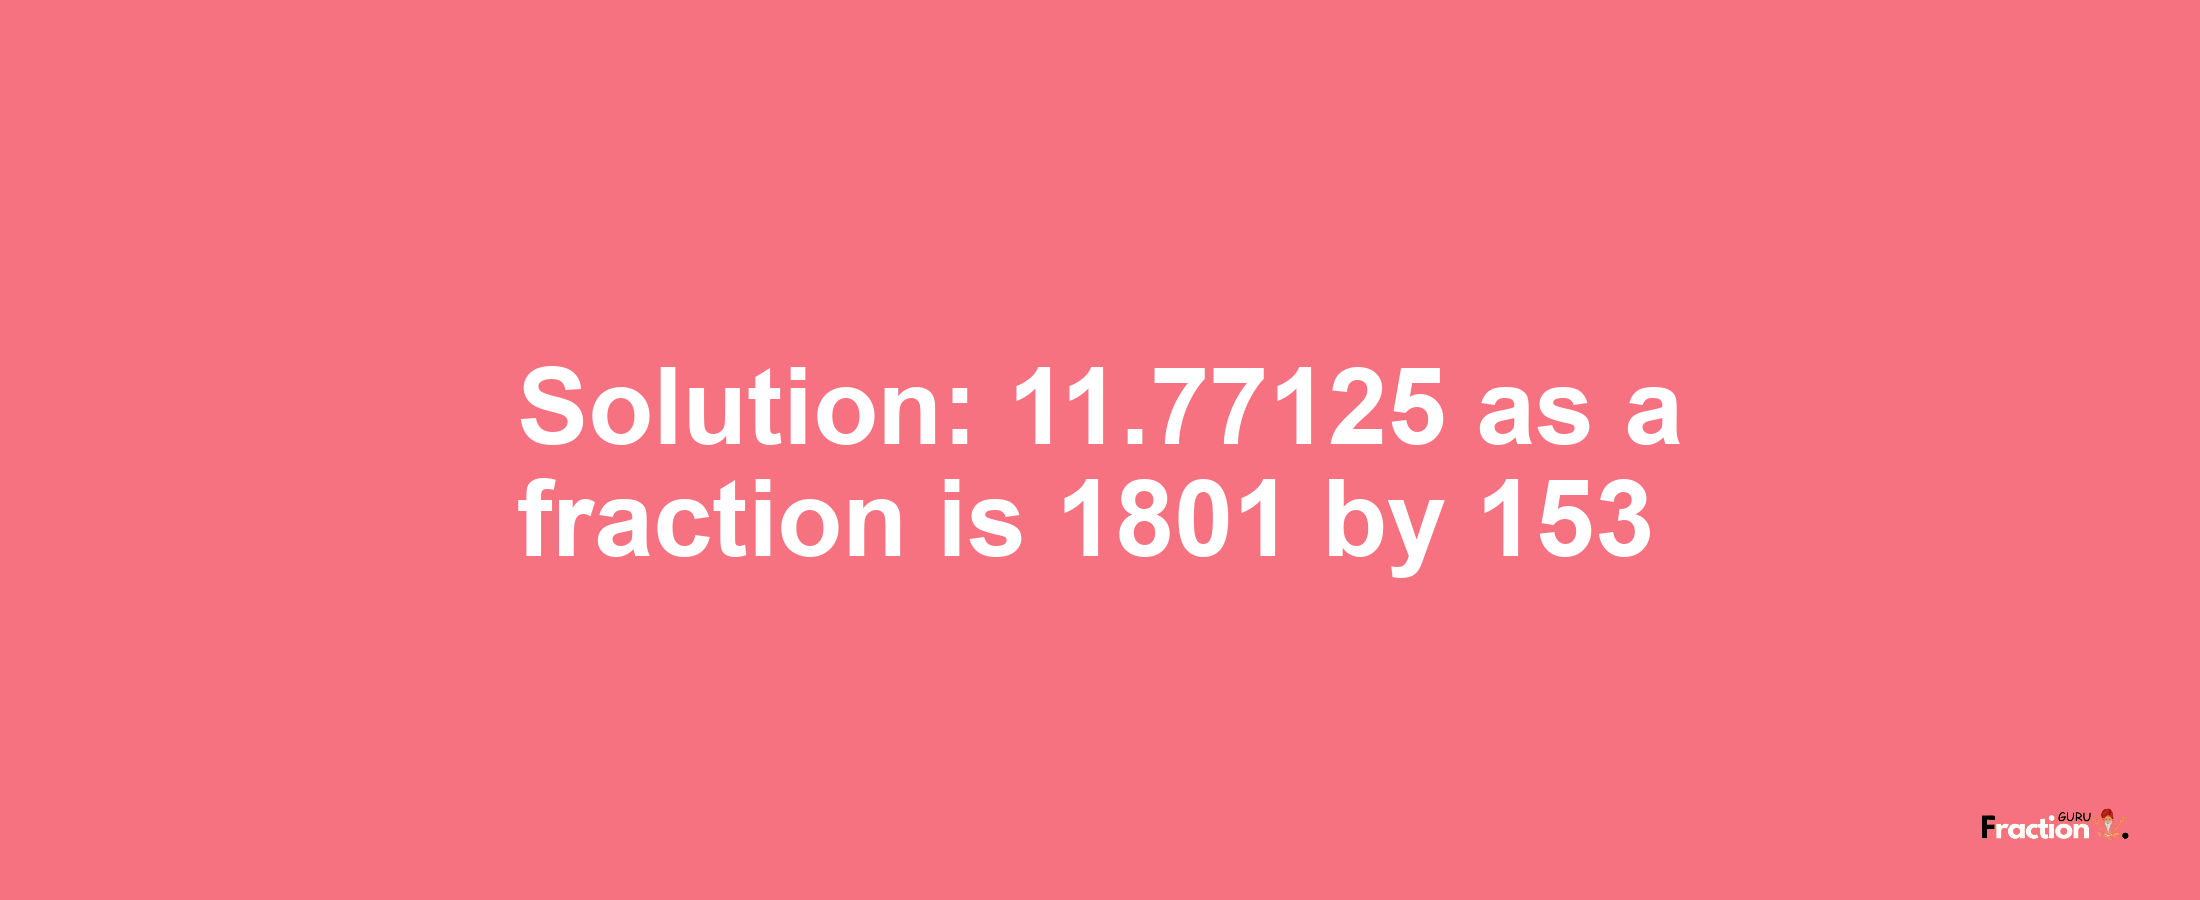 Solution:11.77125 as a fraction is 1801/153